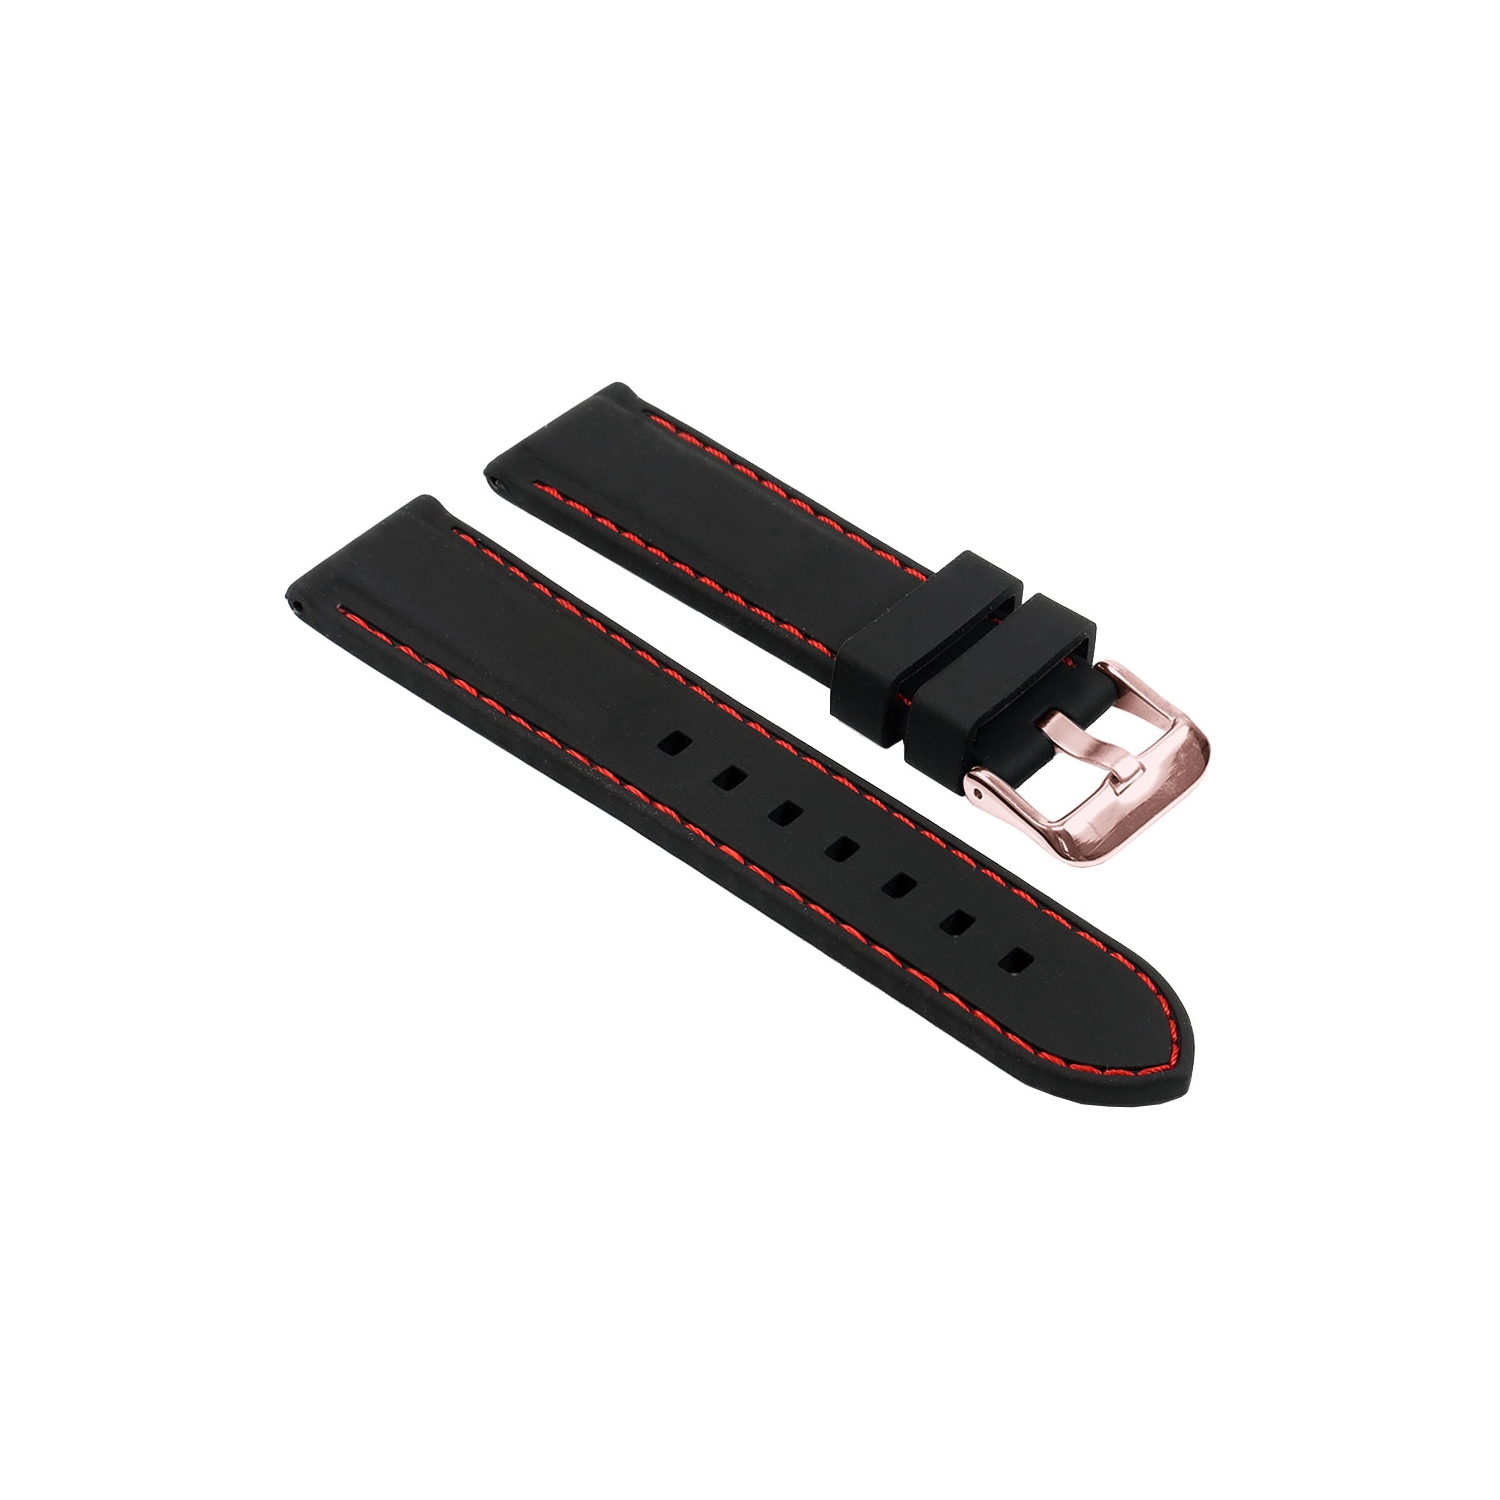 StrapsCo Silicone Rubber Watch Band Strap with Stitching for Fossil Sport Smartwatch - 22mm - Black & Red